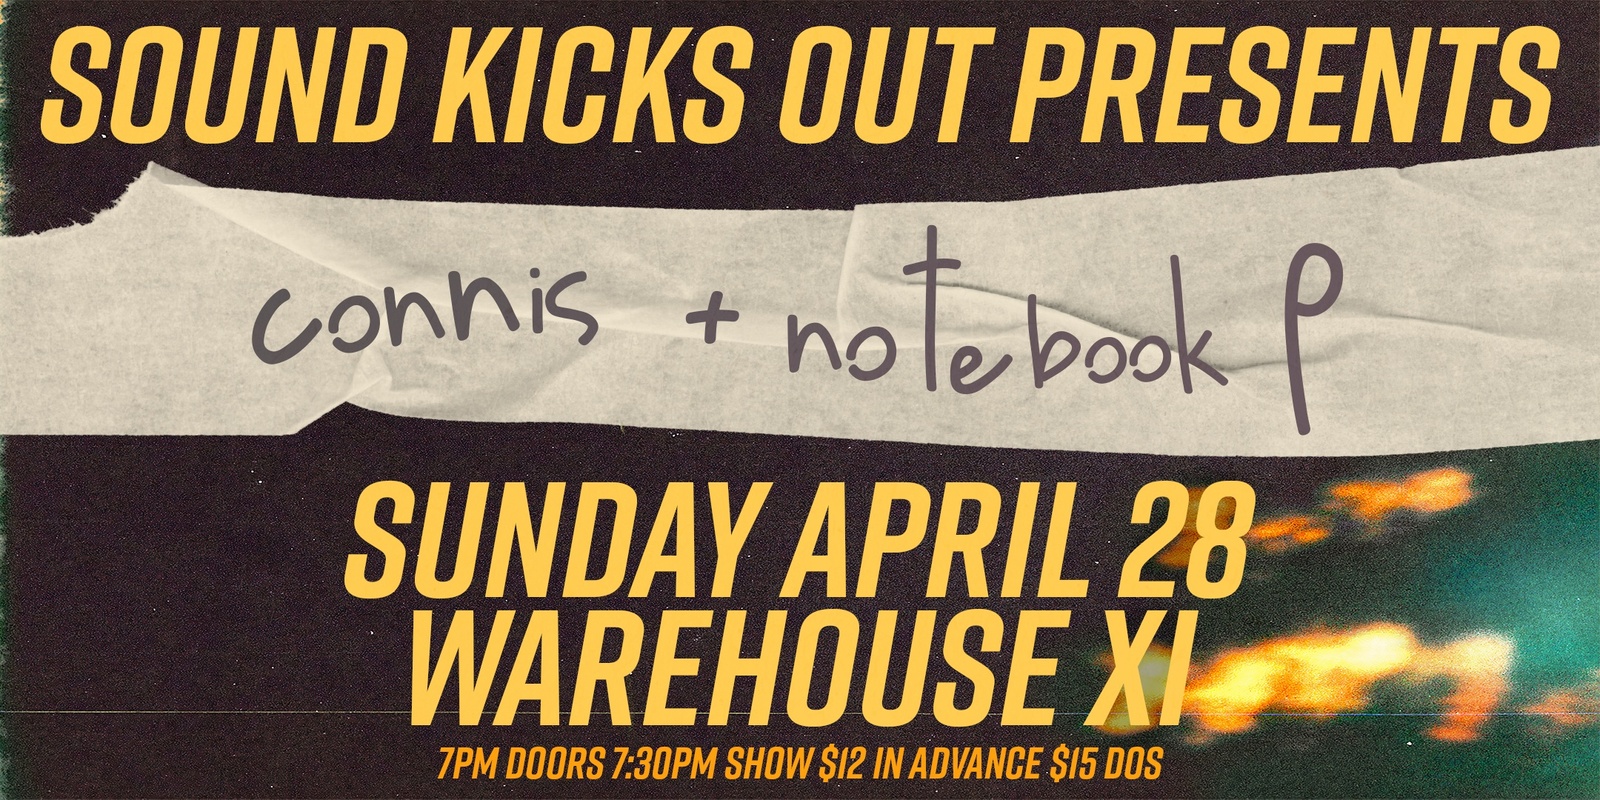 Banner image for Sound Kicks Out Presents: Notebook P + Connis at Warehouse XI